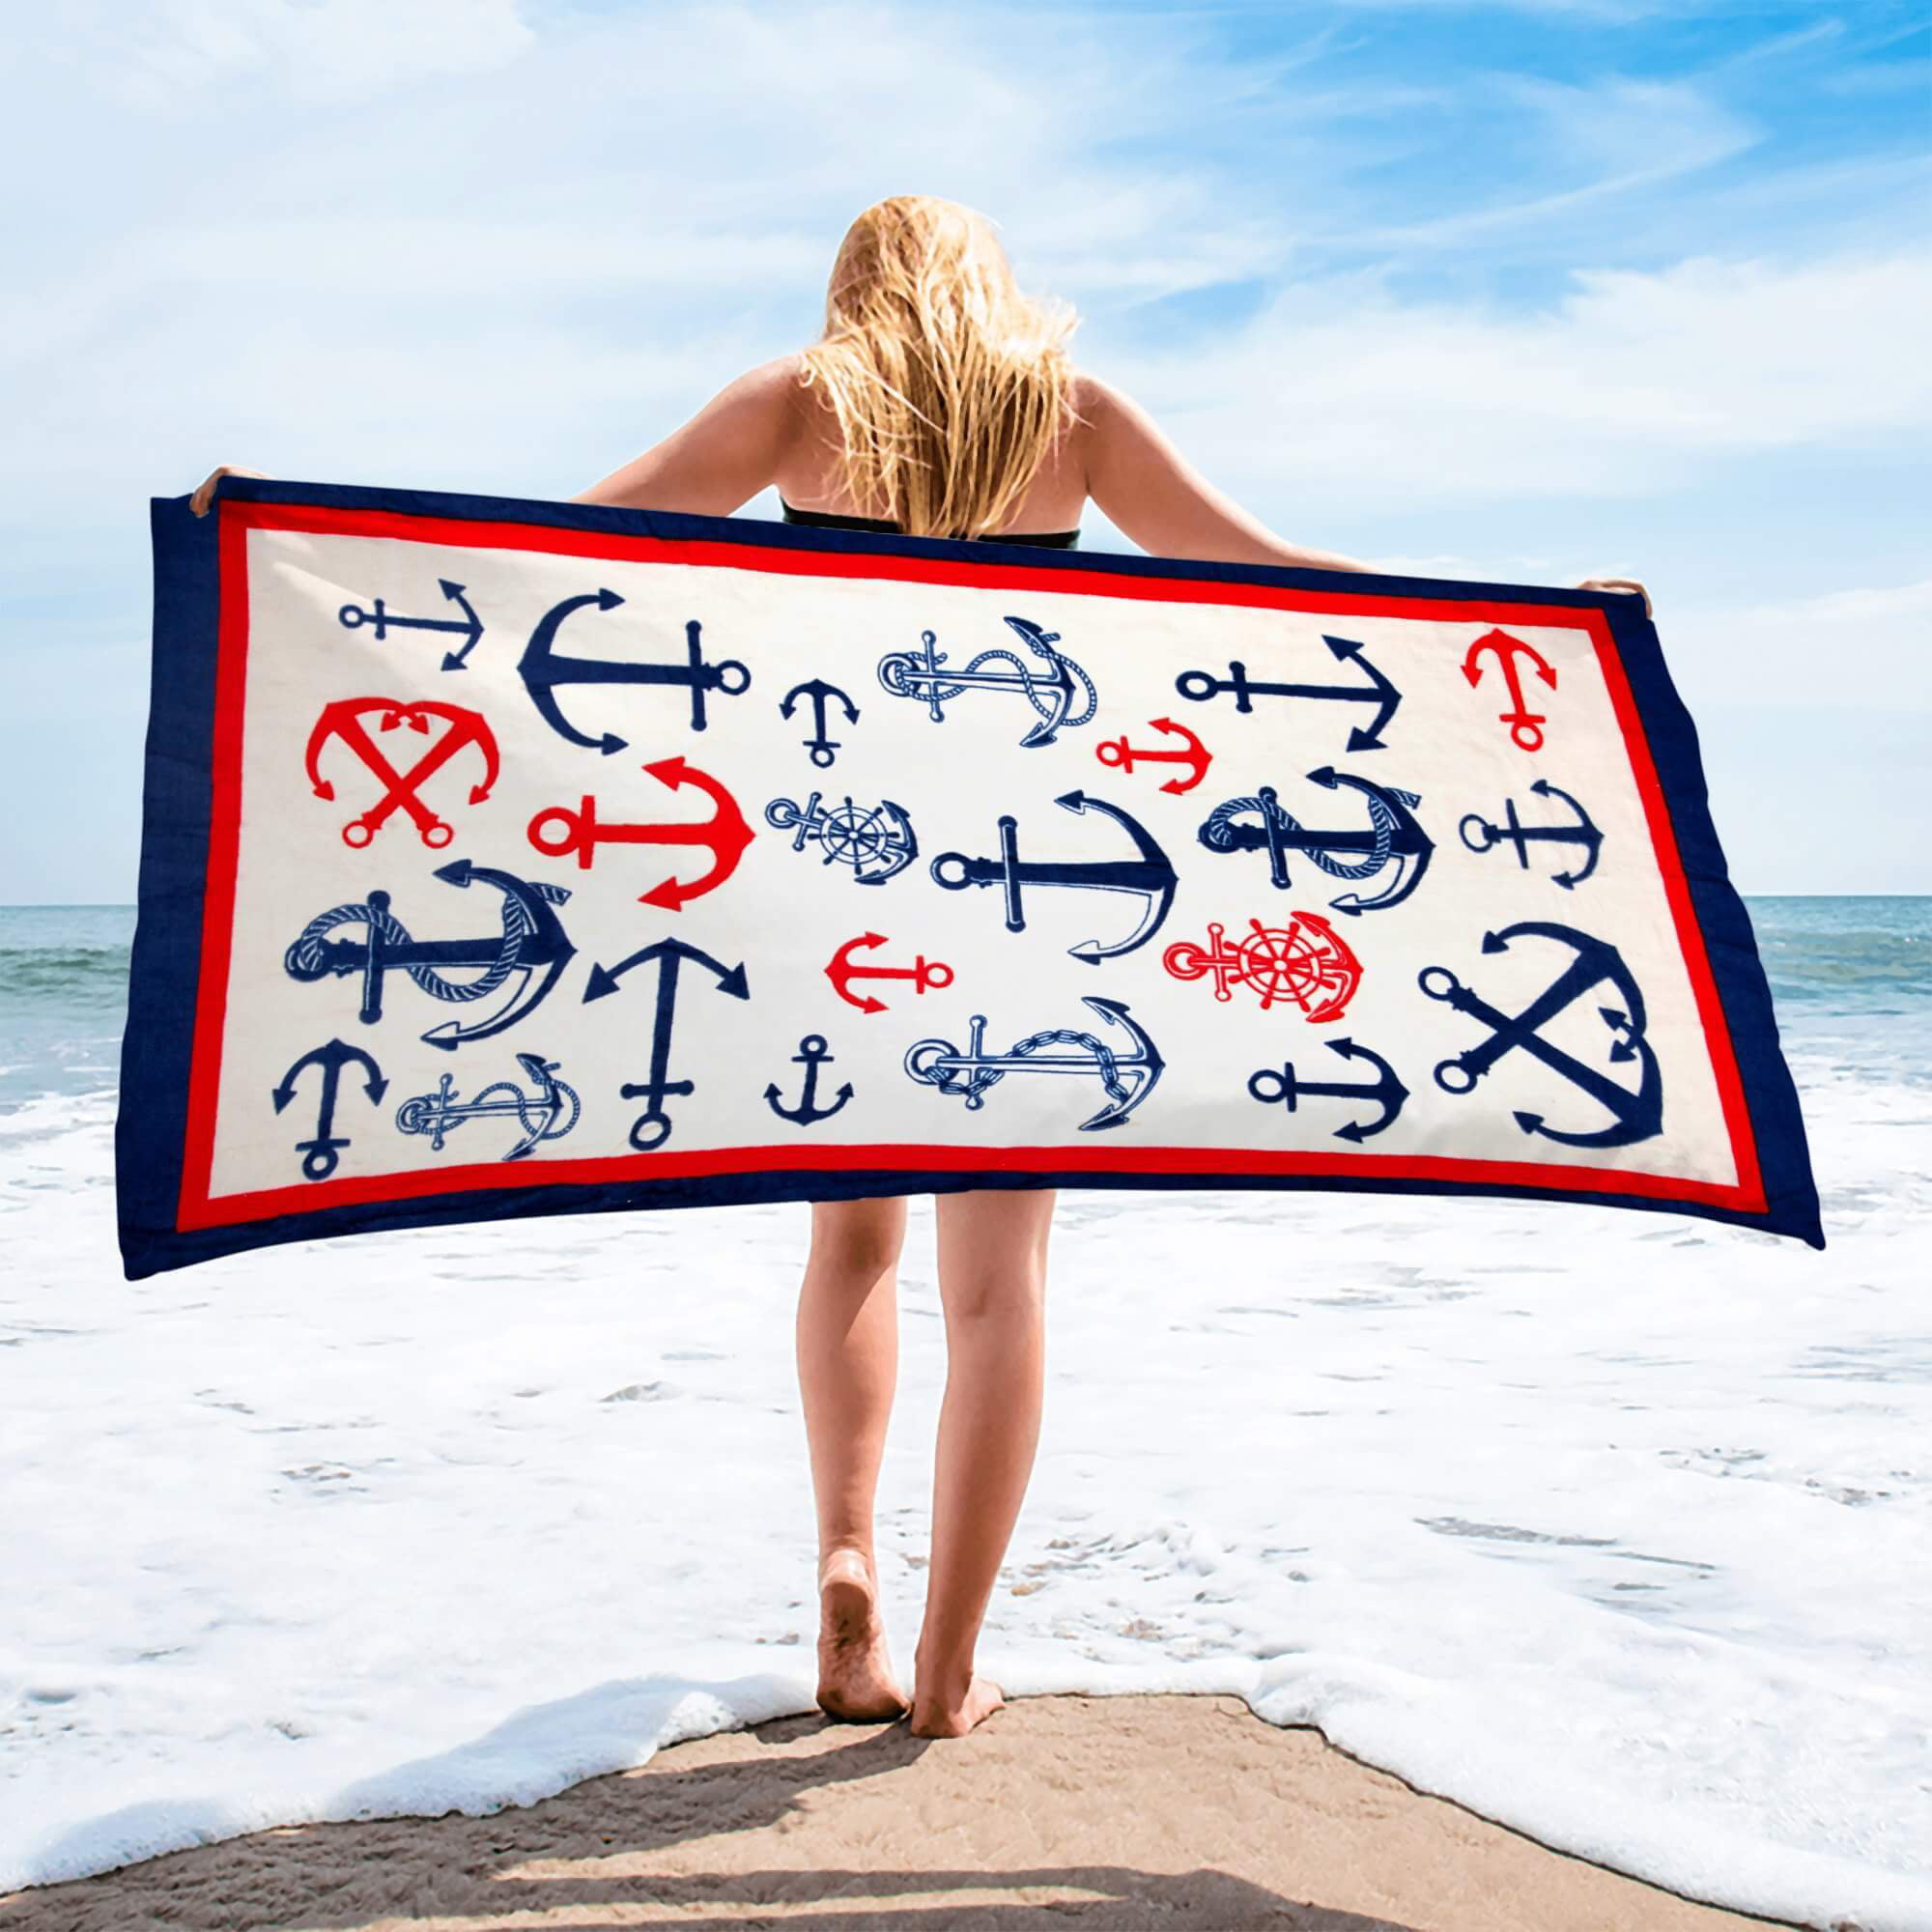 American Flag Beach Towel 100% Cotton Large Soft Bath Towel by Hencely 